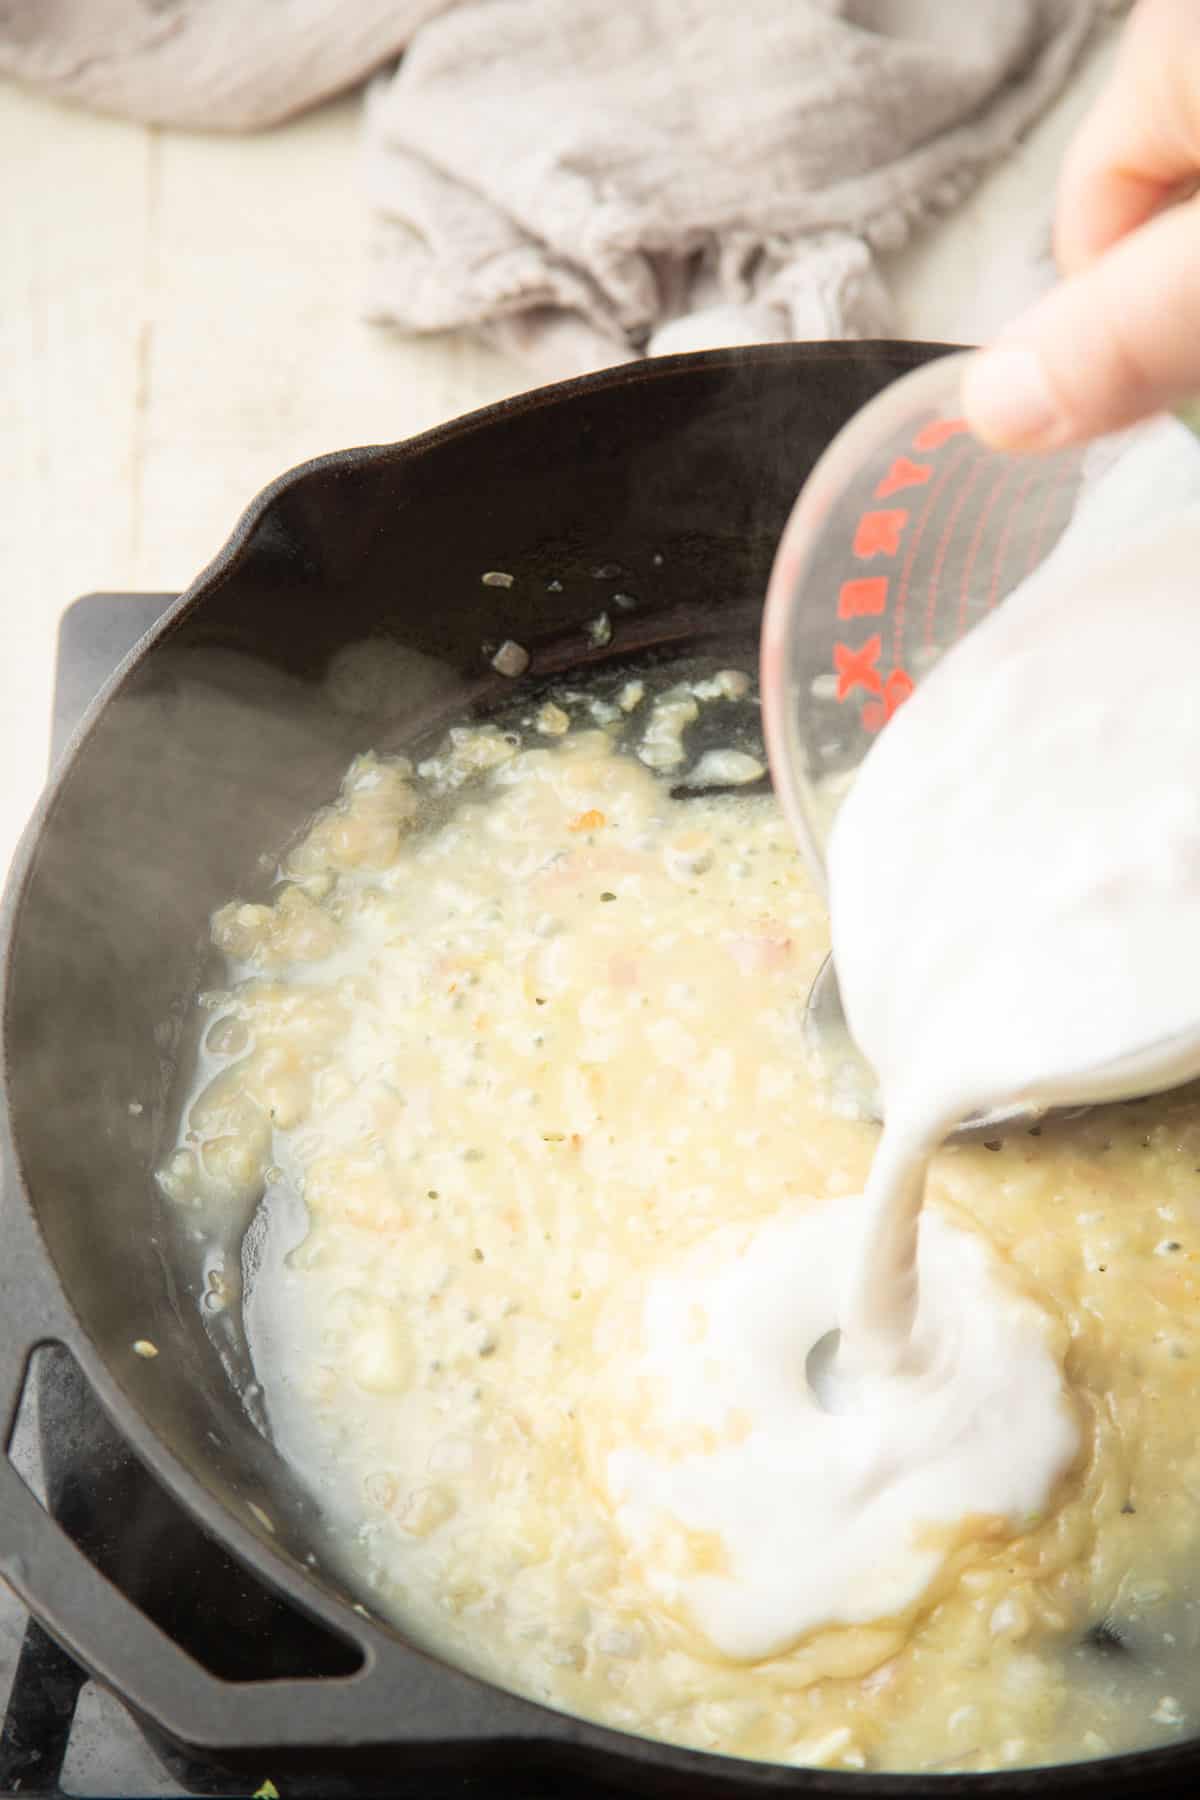 Coconut milk being poured into a skillet of shallots, white wine and flour.